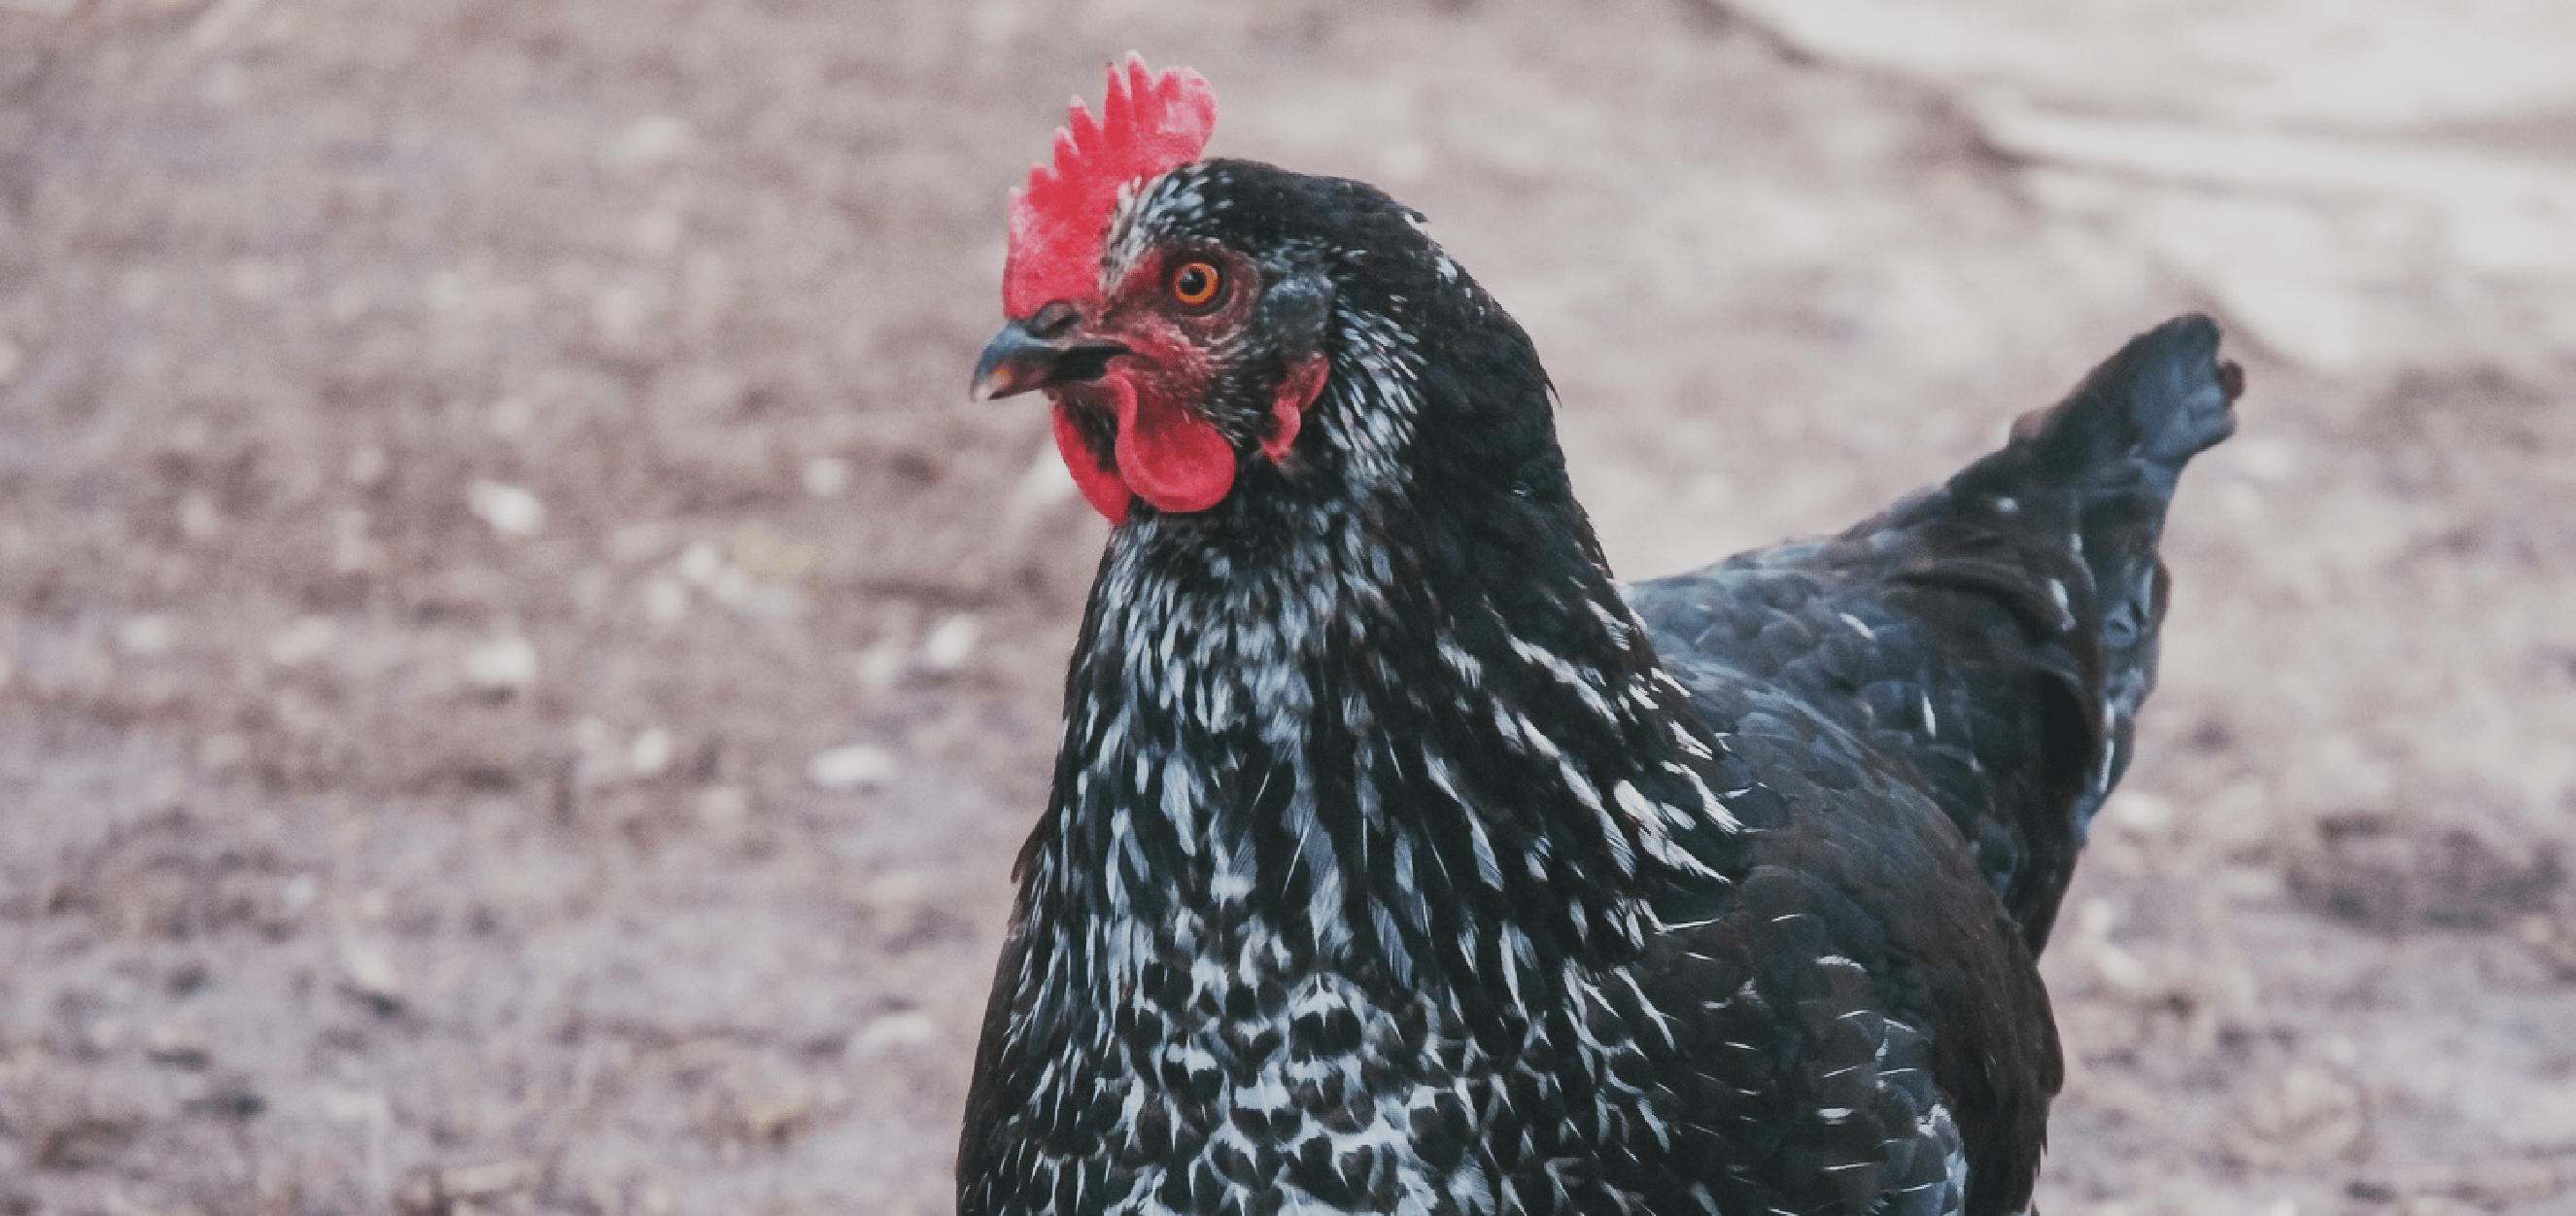 8 Reasons Why Keeping Urban Chickens Is a Bad Idea